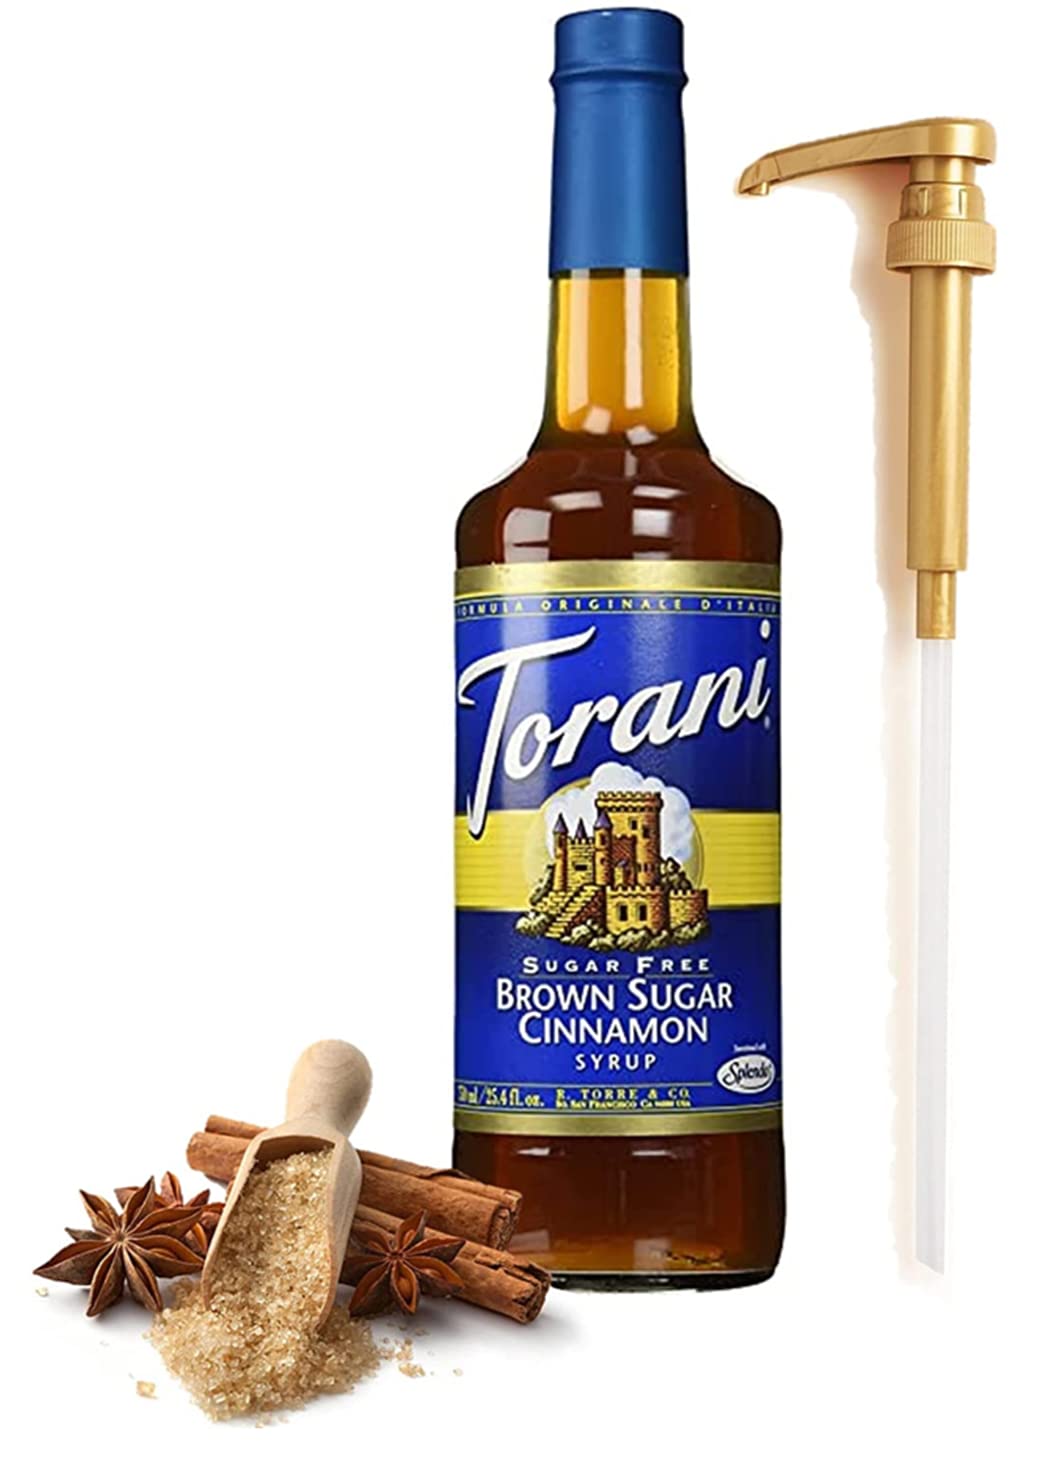 Torani Sugar Free Brown Sugar Cinnamon Syrup for Coffee 25.4 Ounces Coffee Flavoring for Drinks with Fresh Finest Pump